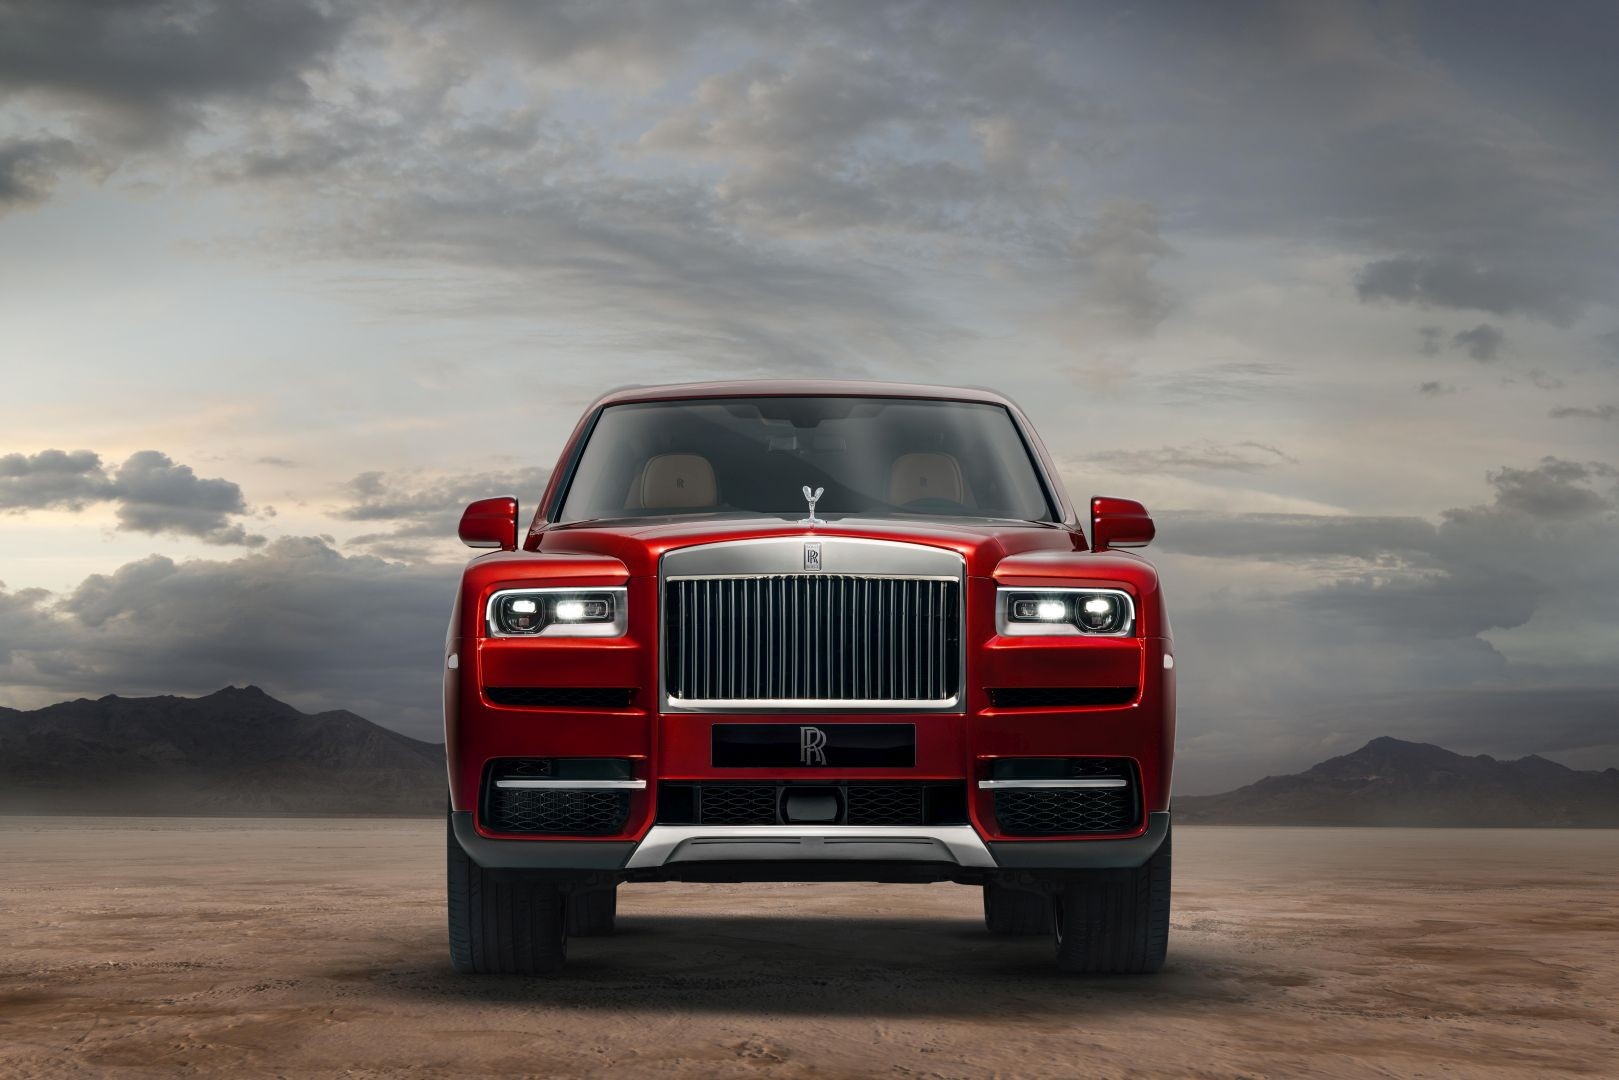 Rolls-Royce unveils its 1st fully electric car with $400K price tag: Spectre